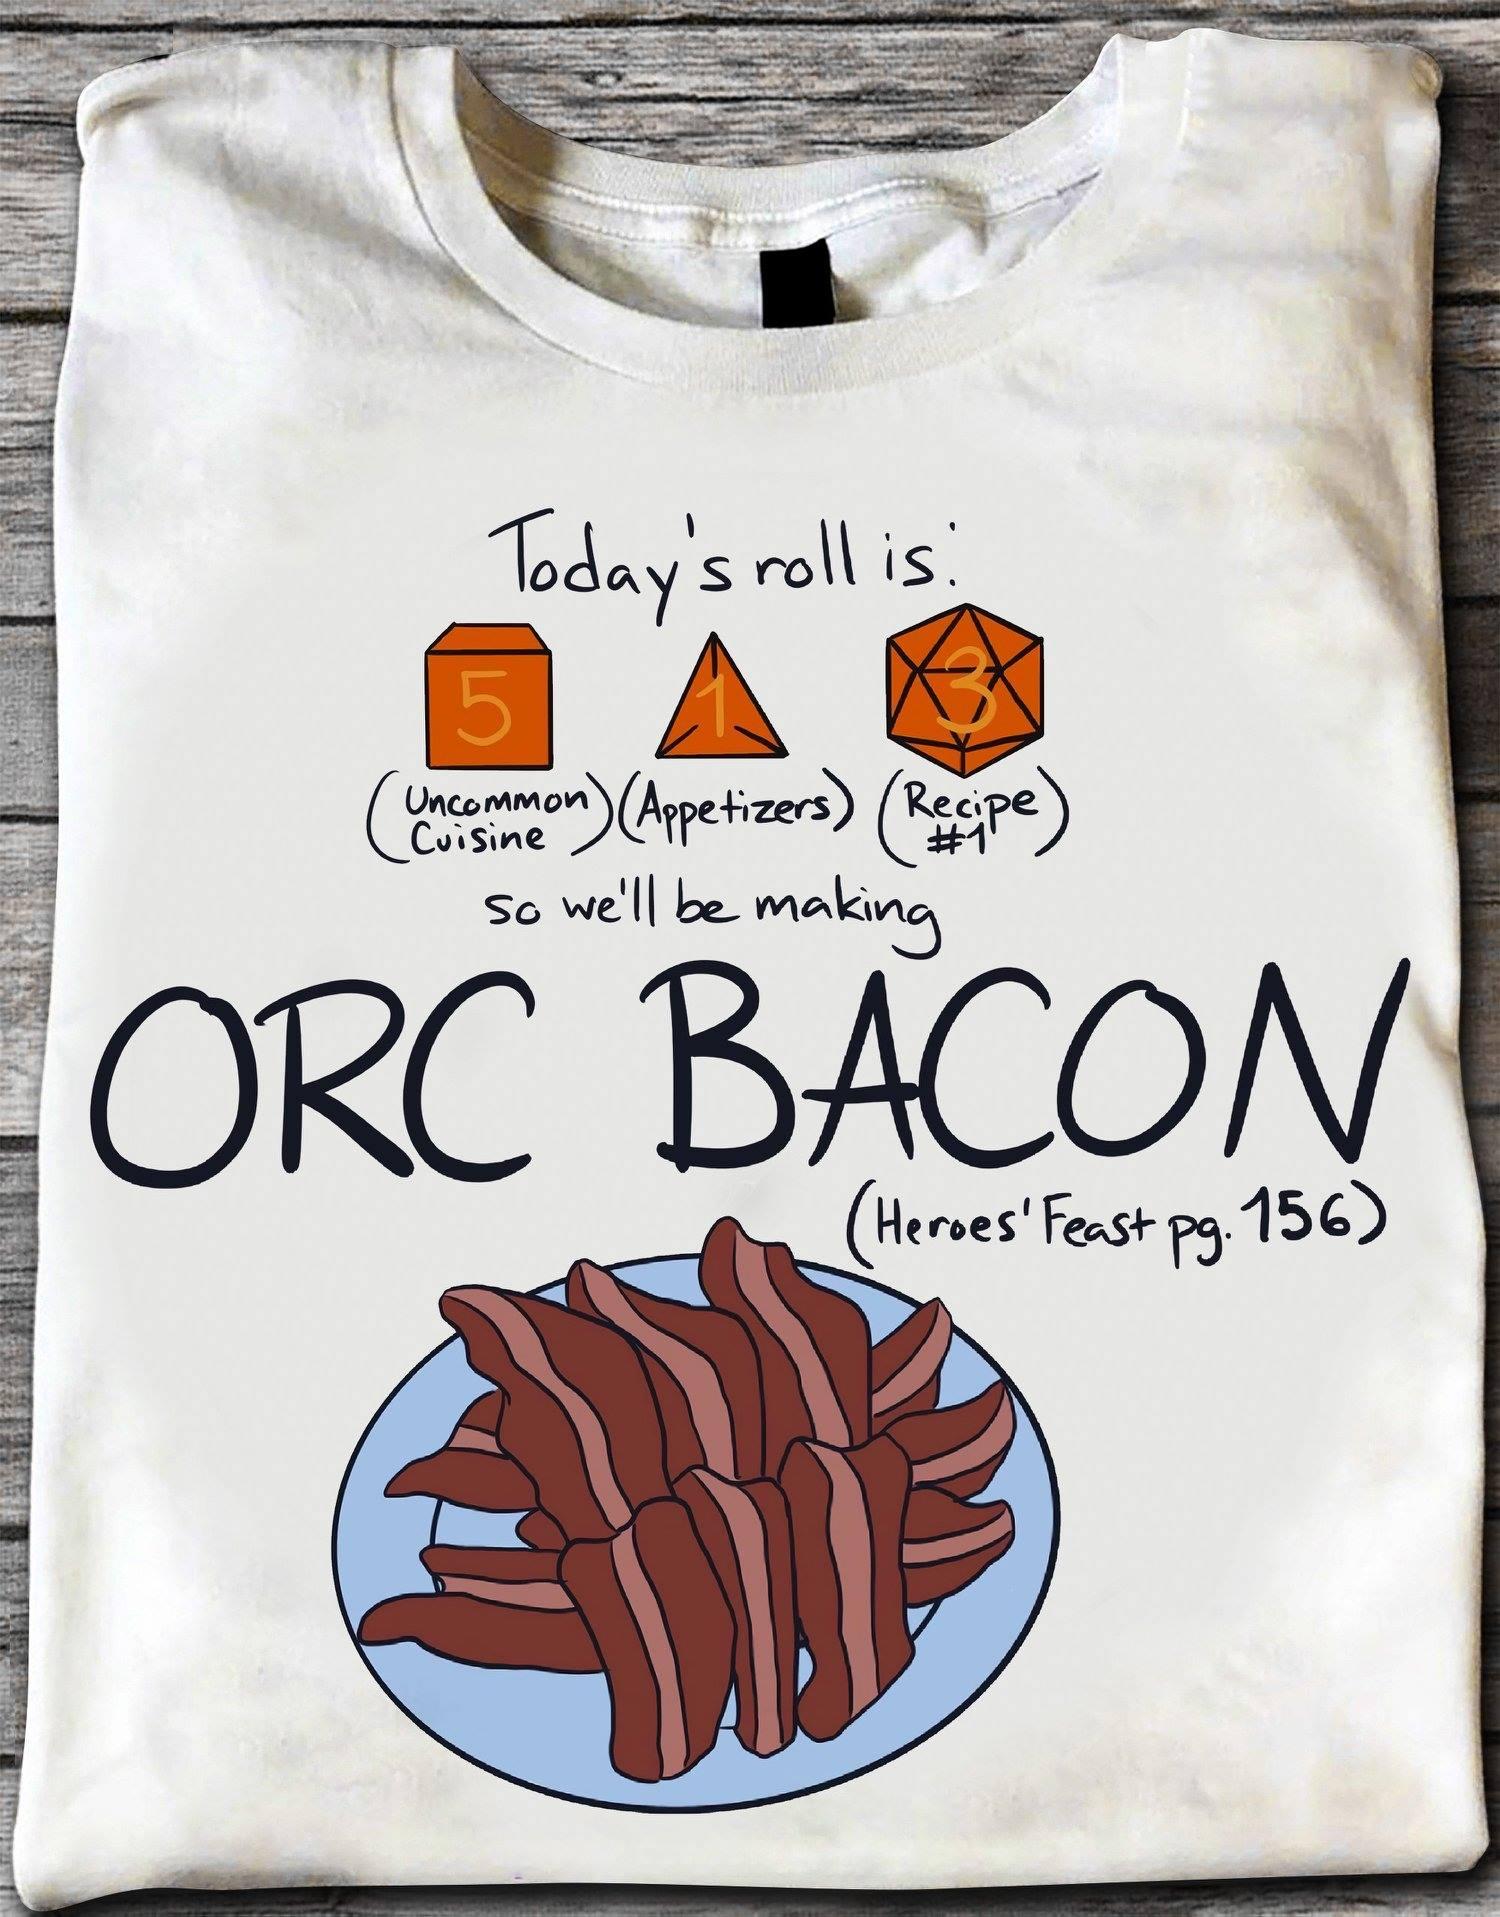 Dice D&D Game, ORC Bacon - Today's Roll Is So We'll Be Making Orc Bacon Heroes Feast Pg 156